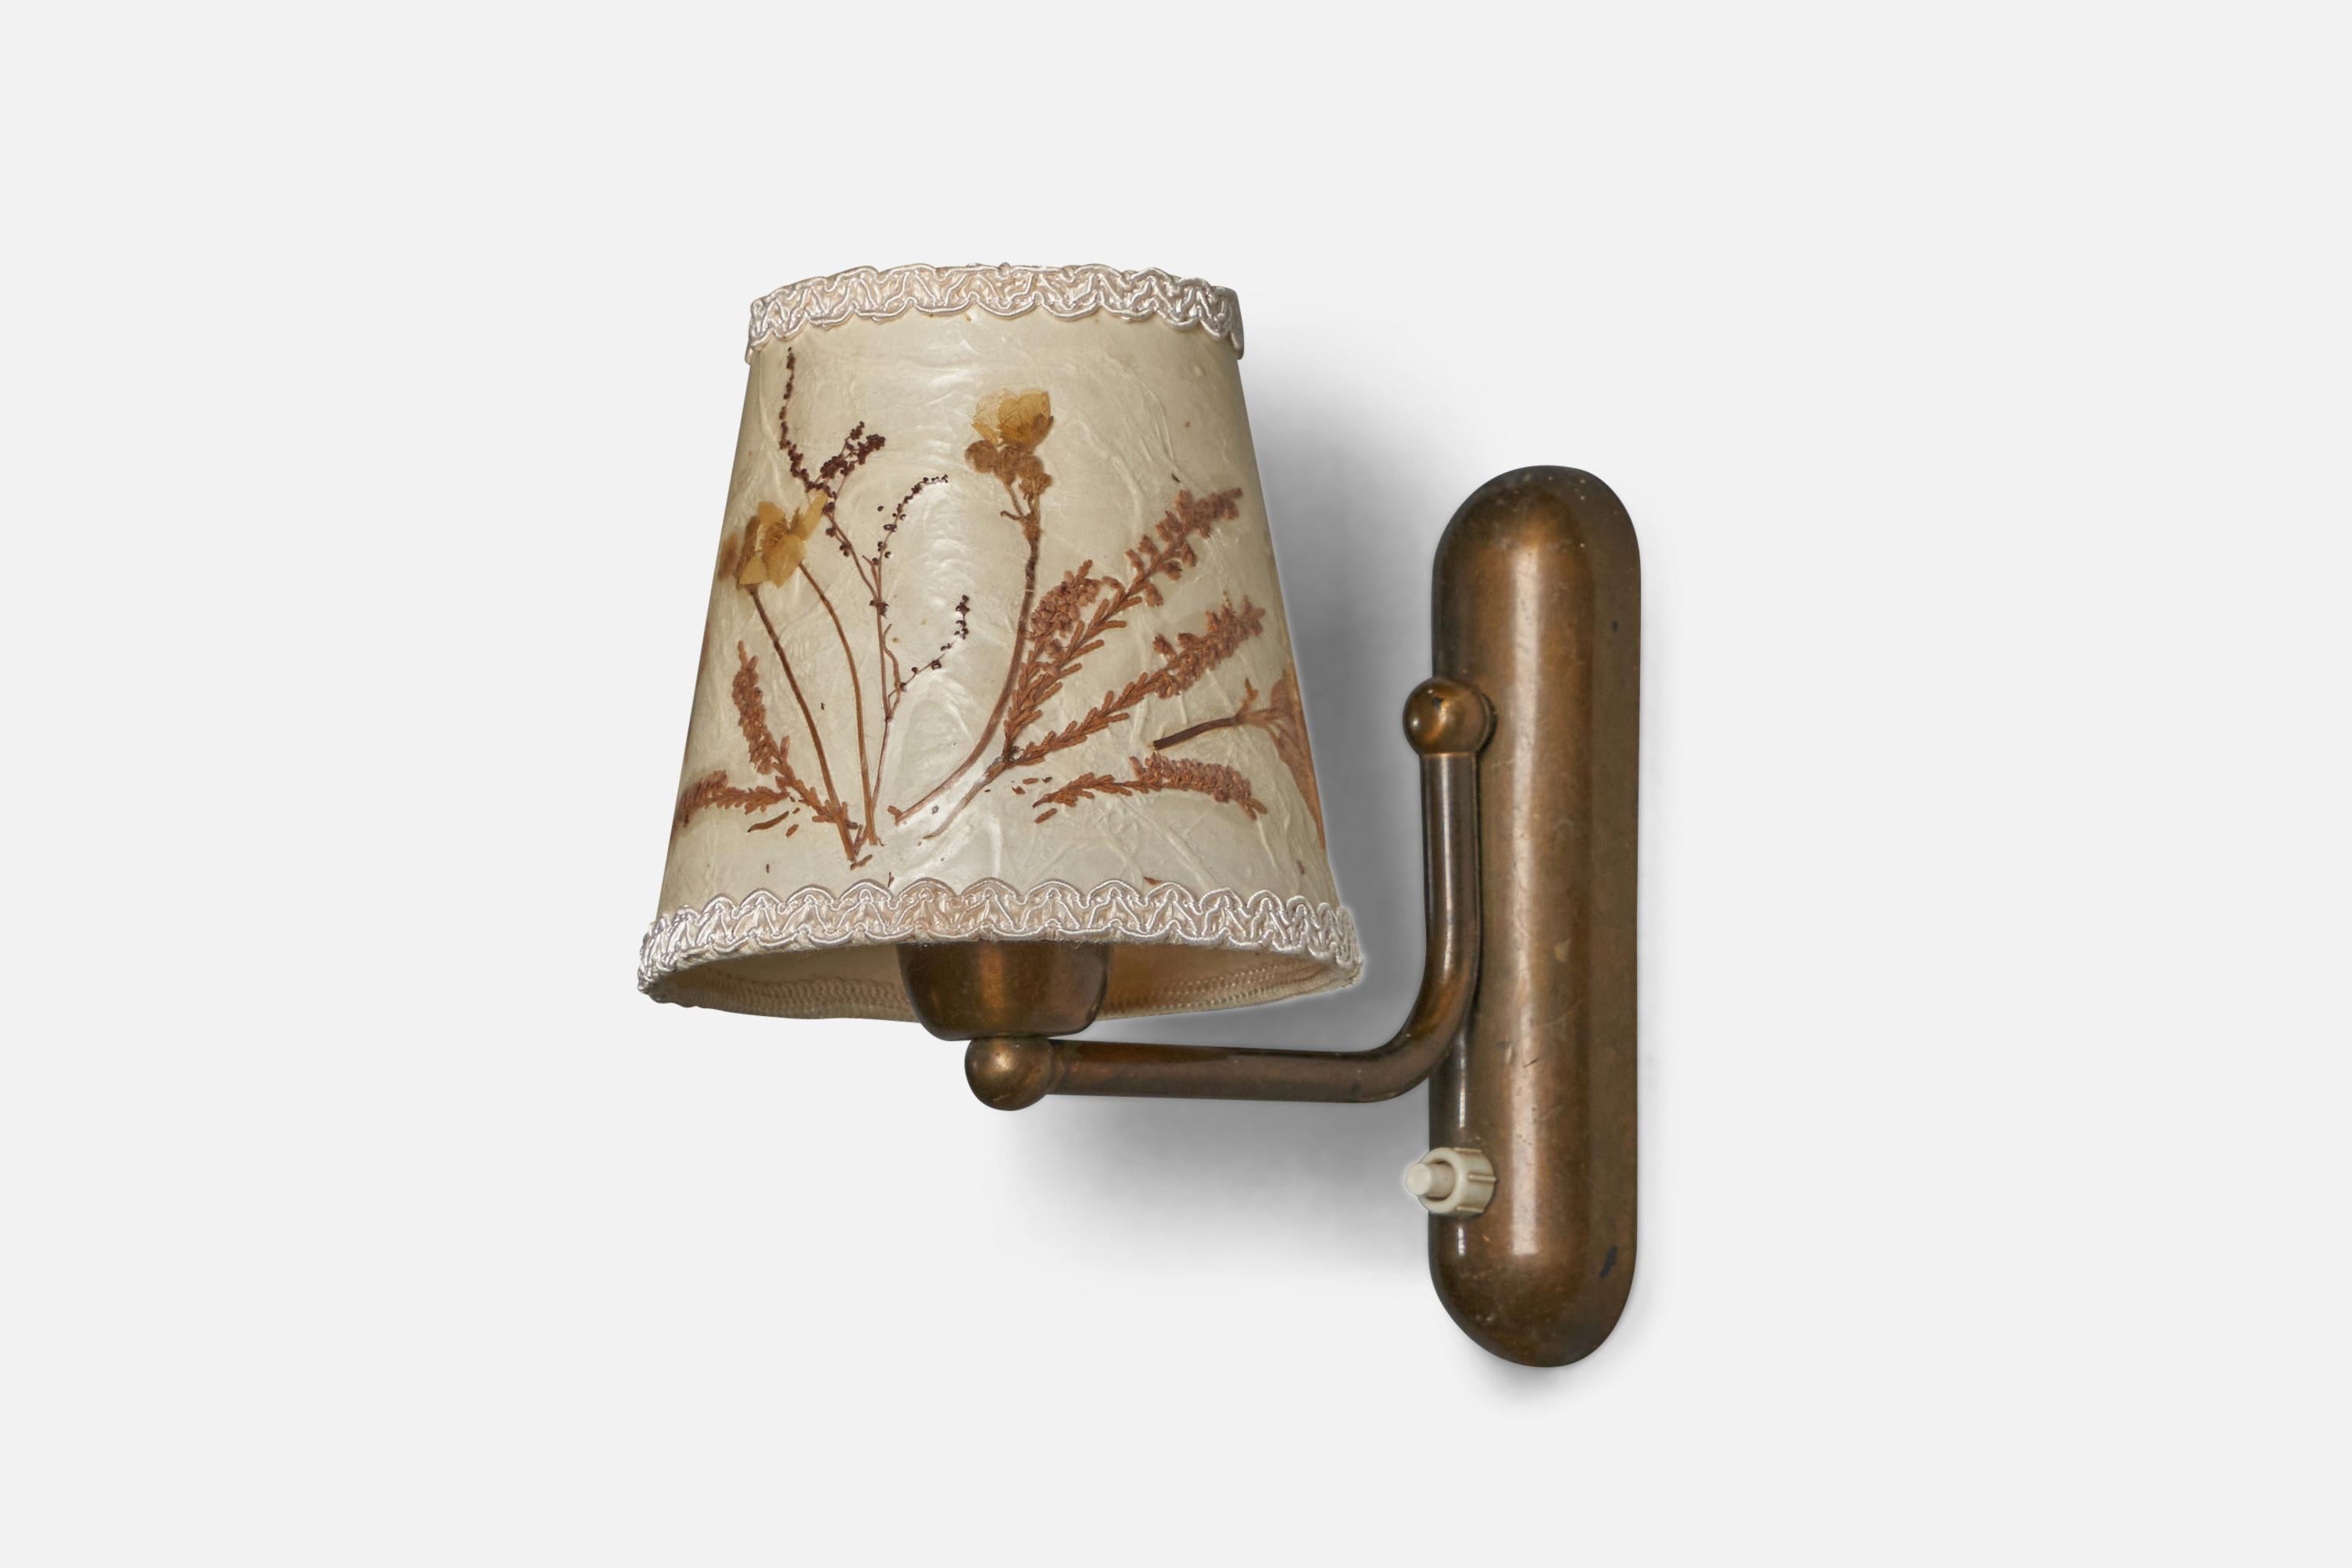 A brass and paper with laminated plants wall light designed and produced in Denmark, 1940s.

Overall Dimensions (inches): 7.75” H x 5” W x 8” D

Back Plate Dimensions (inches): 6.5” H x 1.65” W x 1” D

Bulb Specifications: E-26 Bulb

Number of